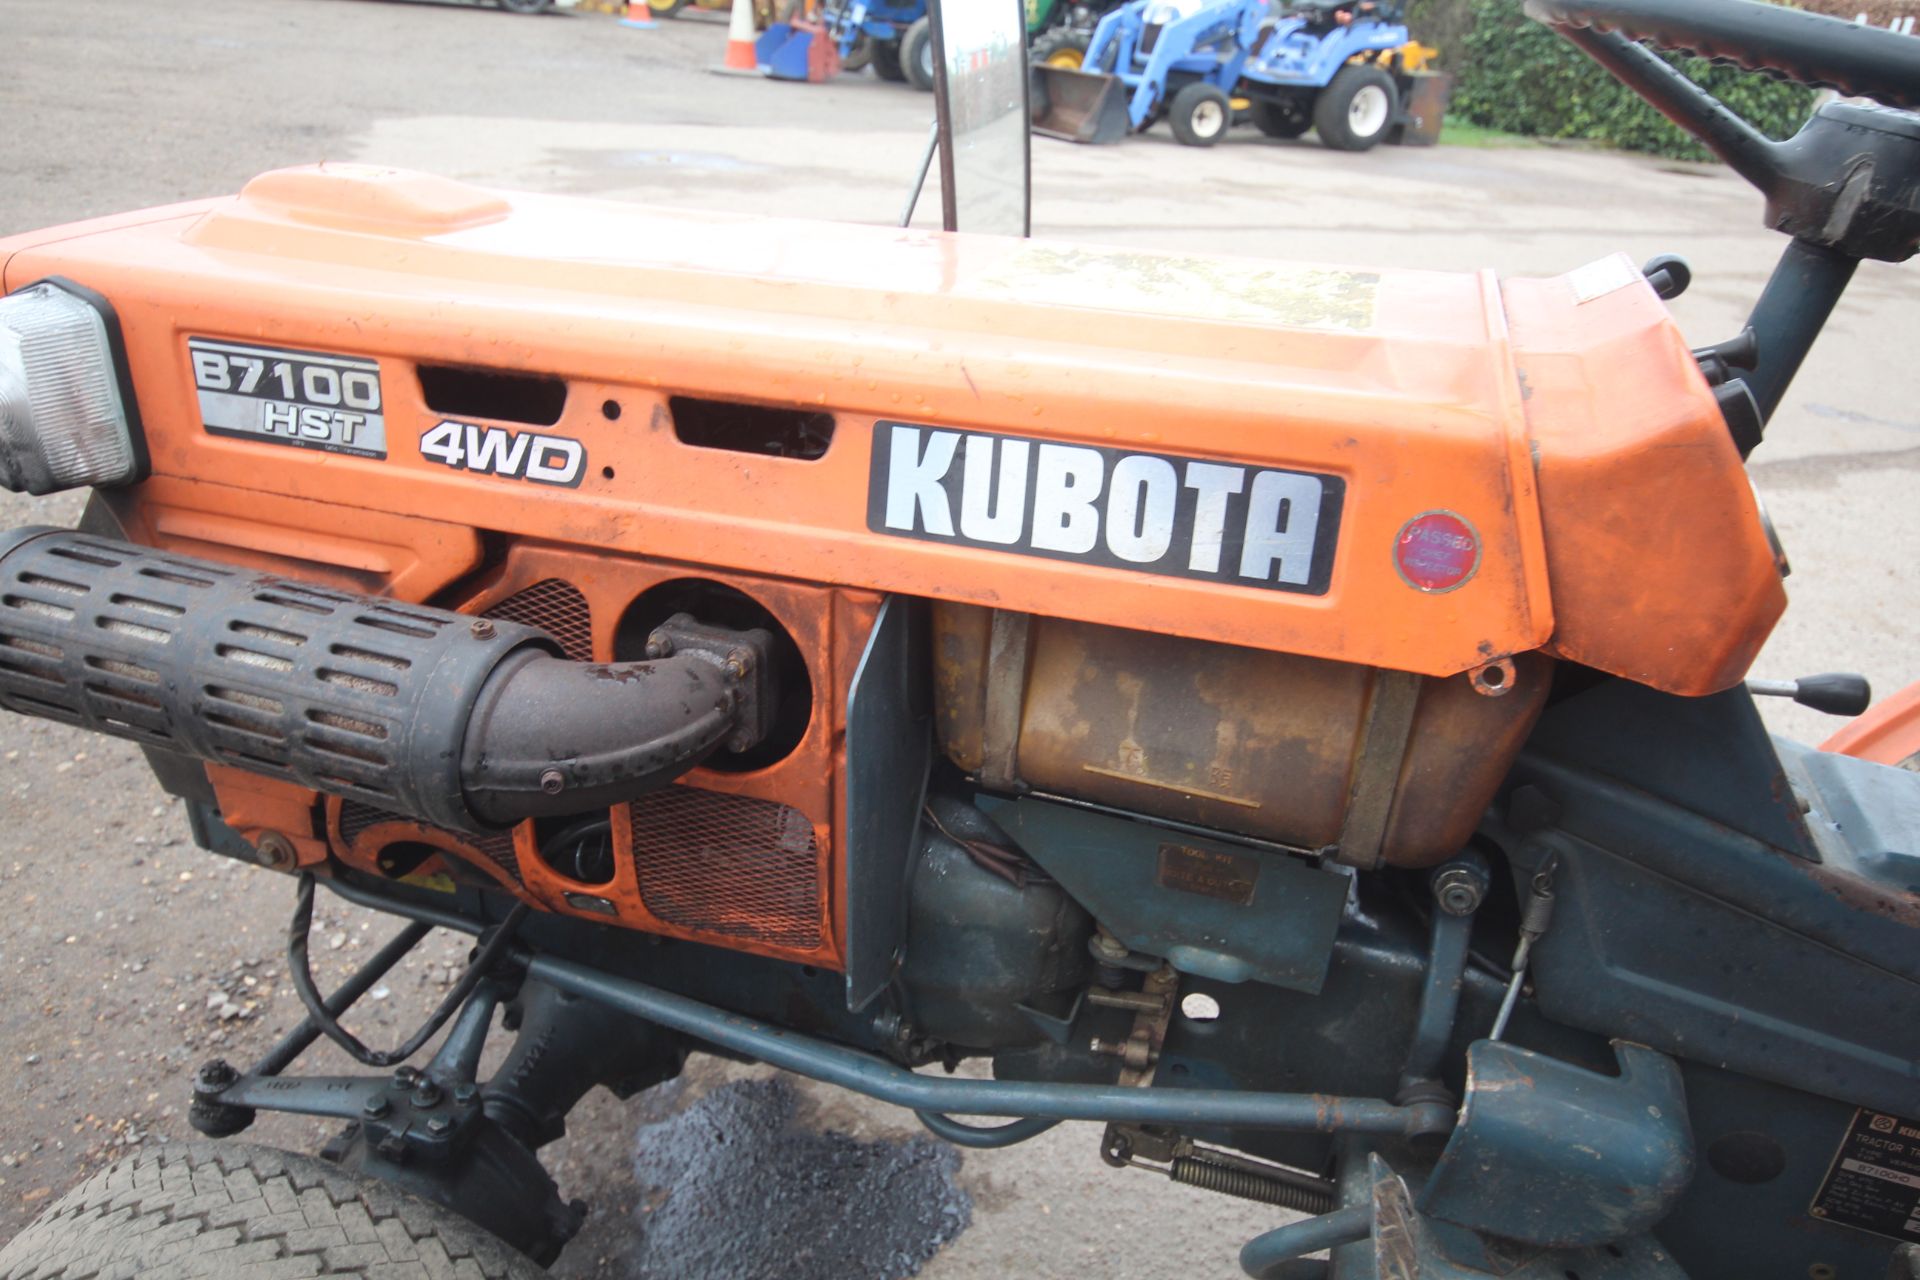 Kubota B7100 HST 4WD compact tractor. 3,134 hours. 29/12.00-15 rear turf wheels and tyres. Front - Bild 23 aus 41